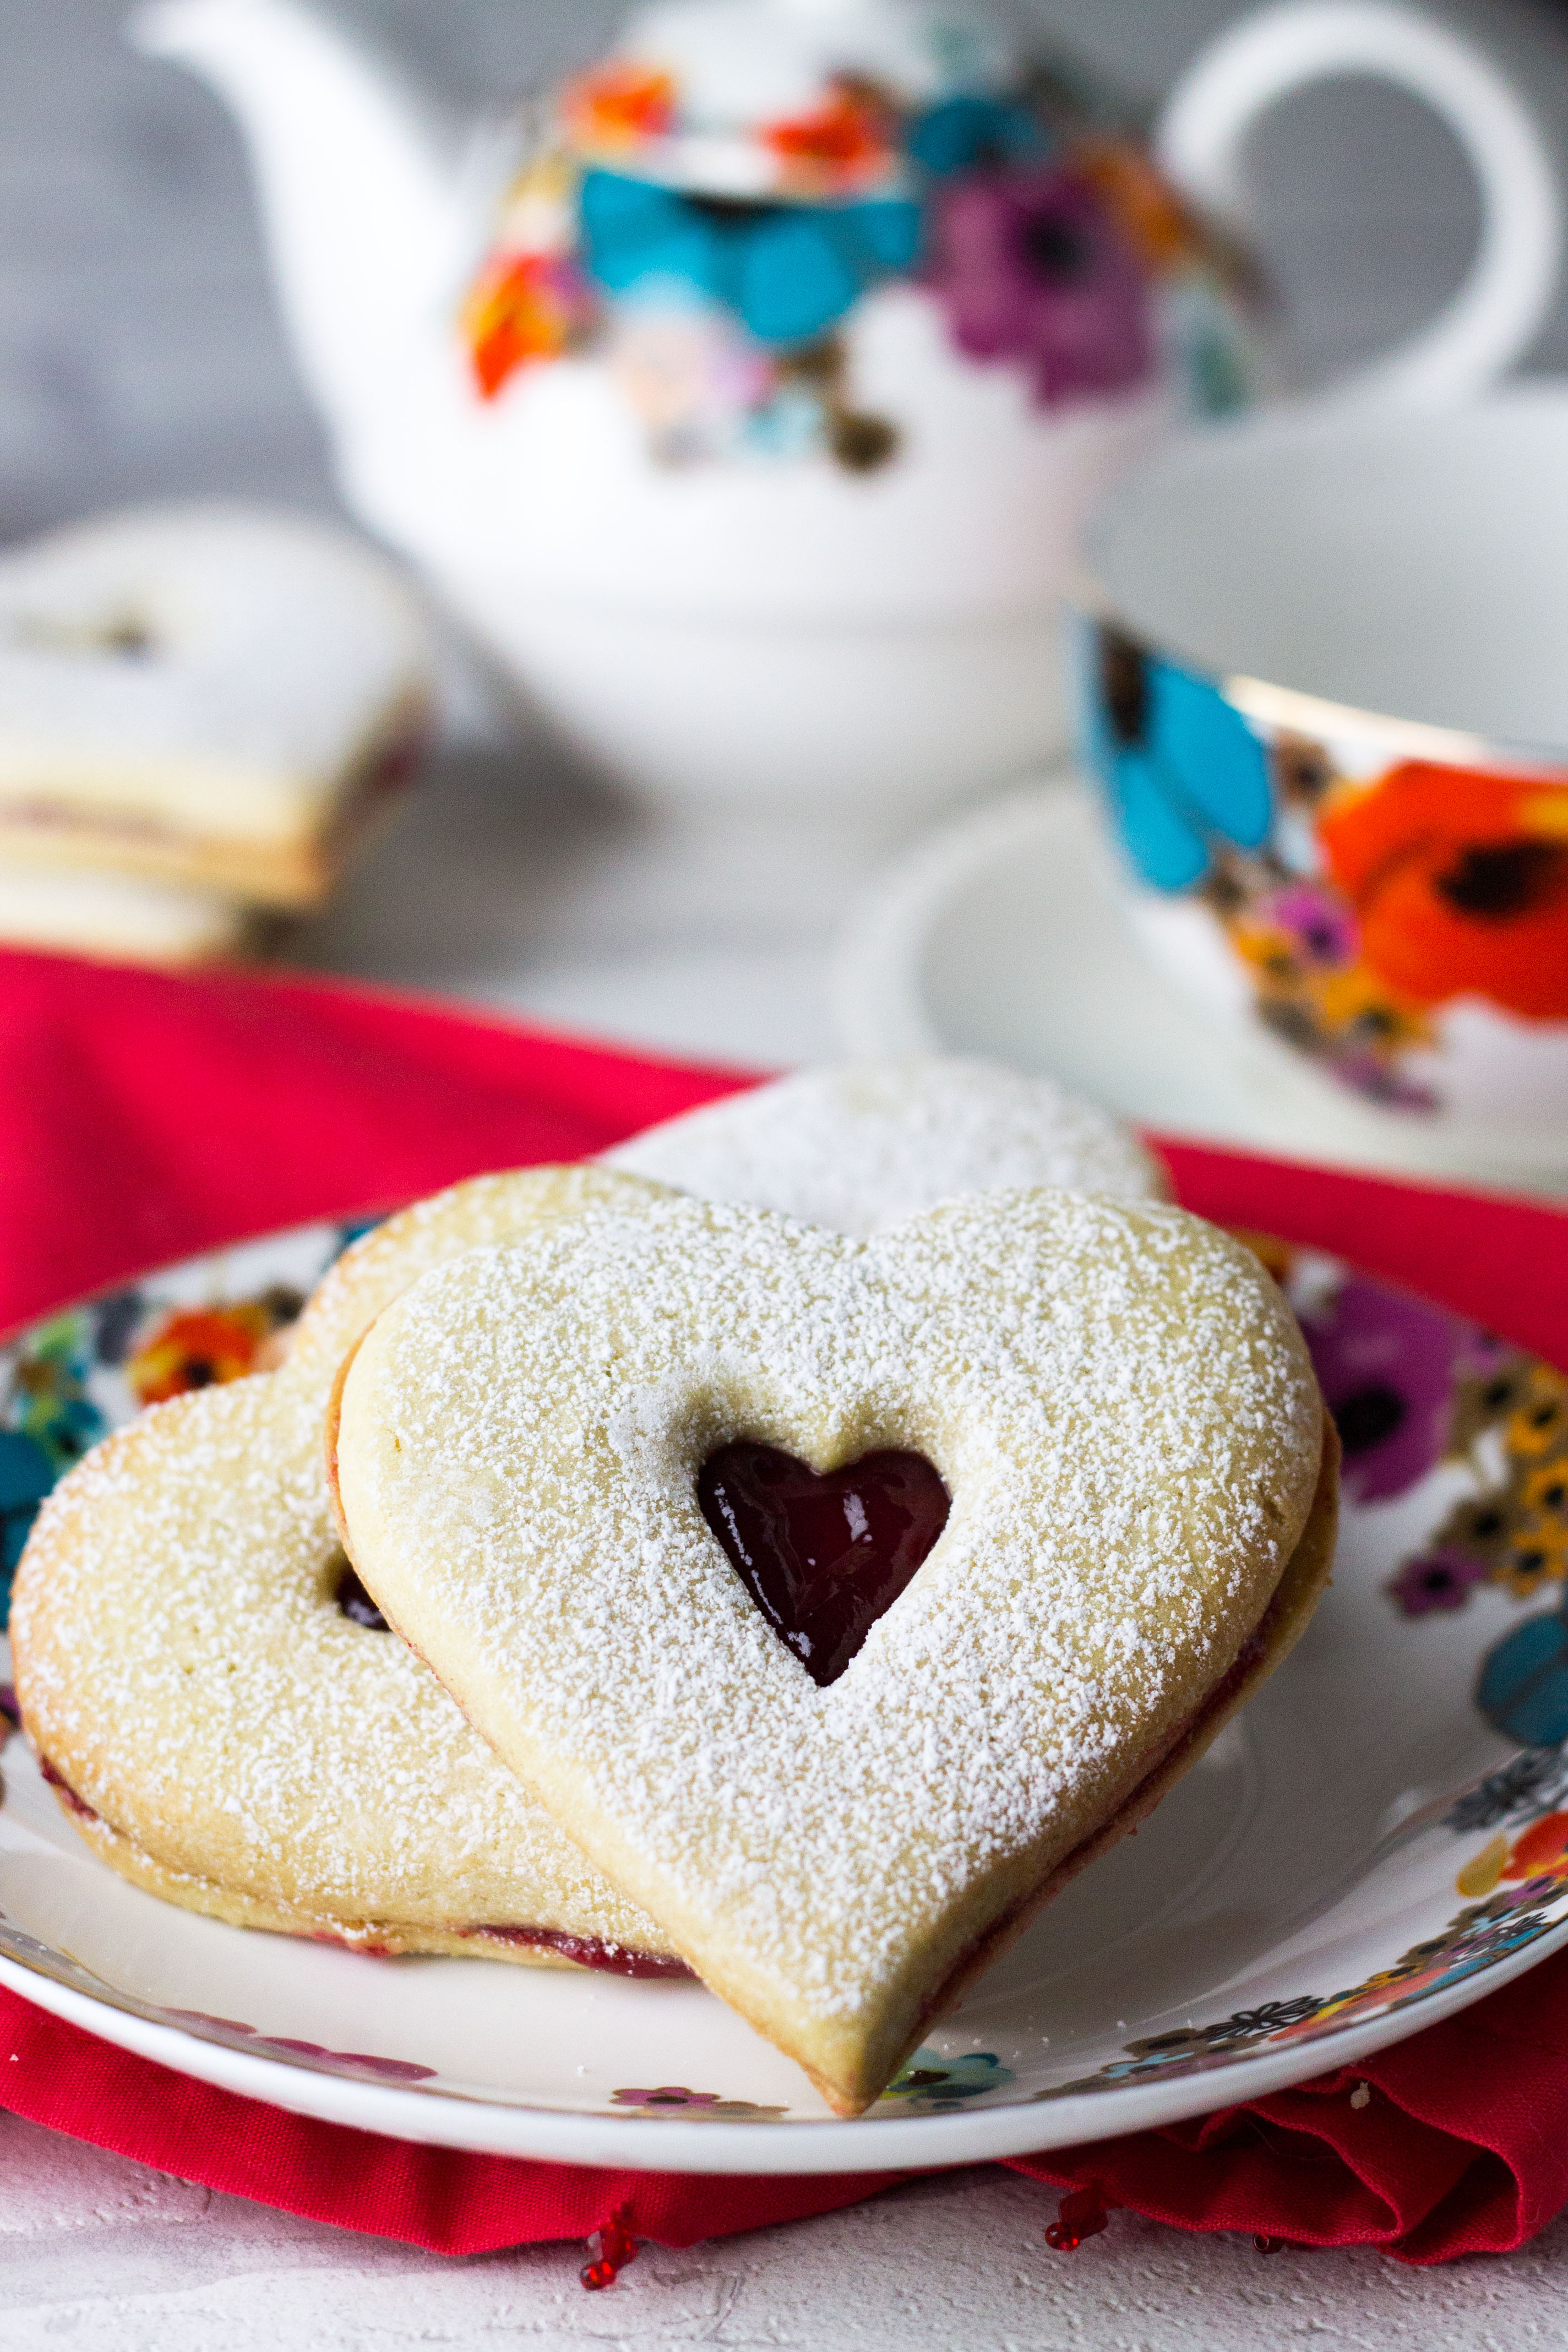 Raspberry Butter Cookies - Erren's Kitchen - This Simple linzer style sandwich cookie recipe is just the right balance of the tart raspberry filling and the tender, buttery sweetness of the cookie. 